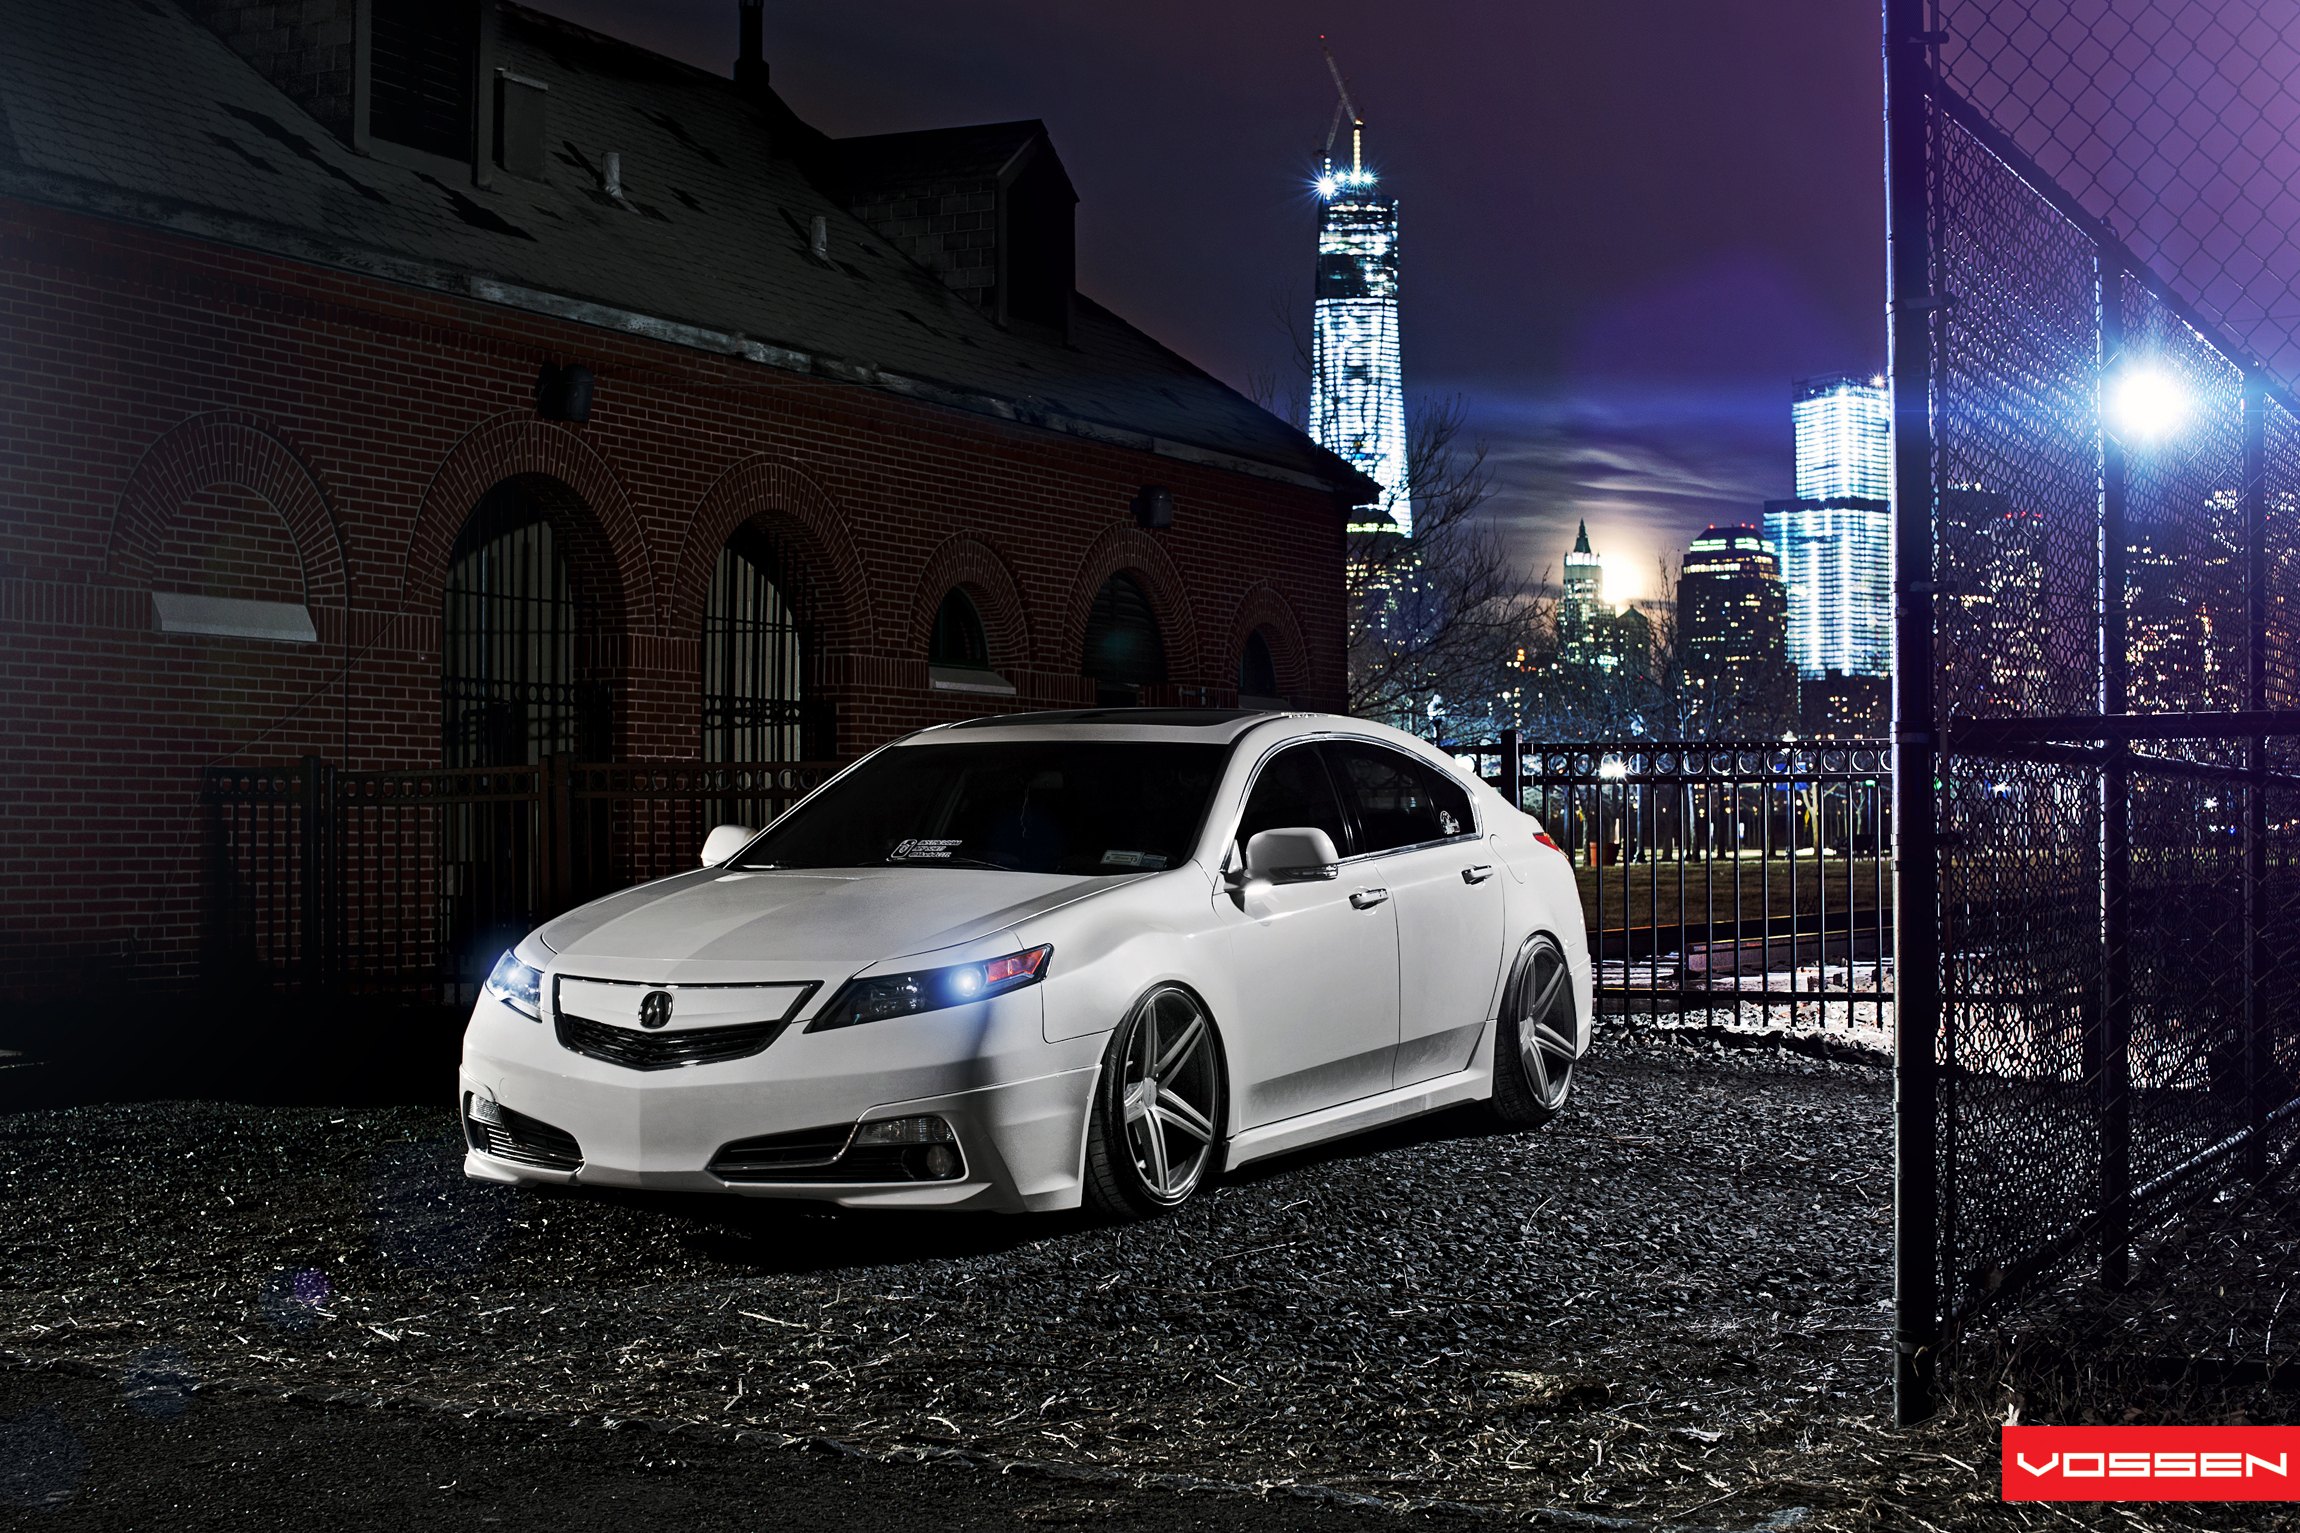 White Acura TL with Custom Body Kit - Photo by Vossen